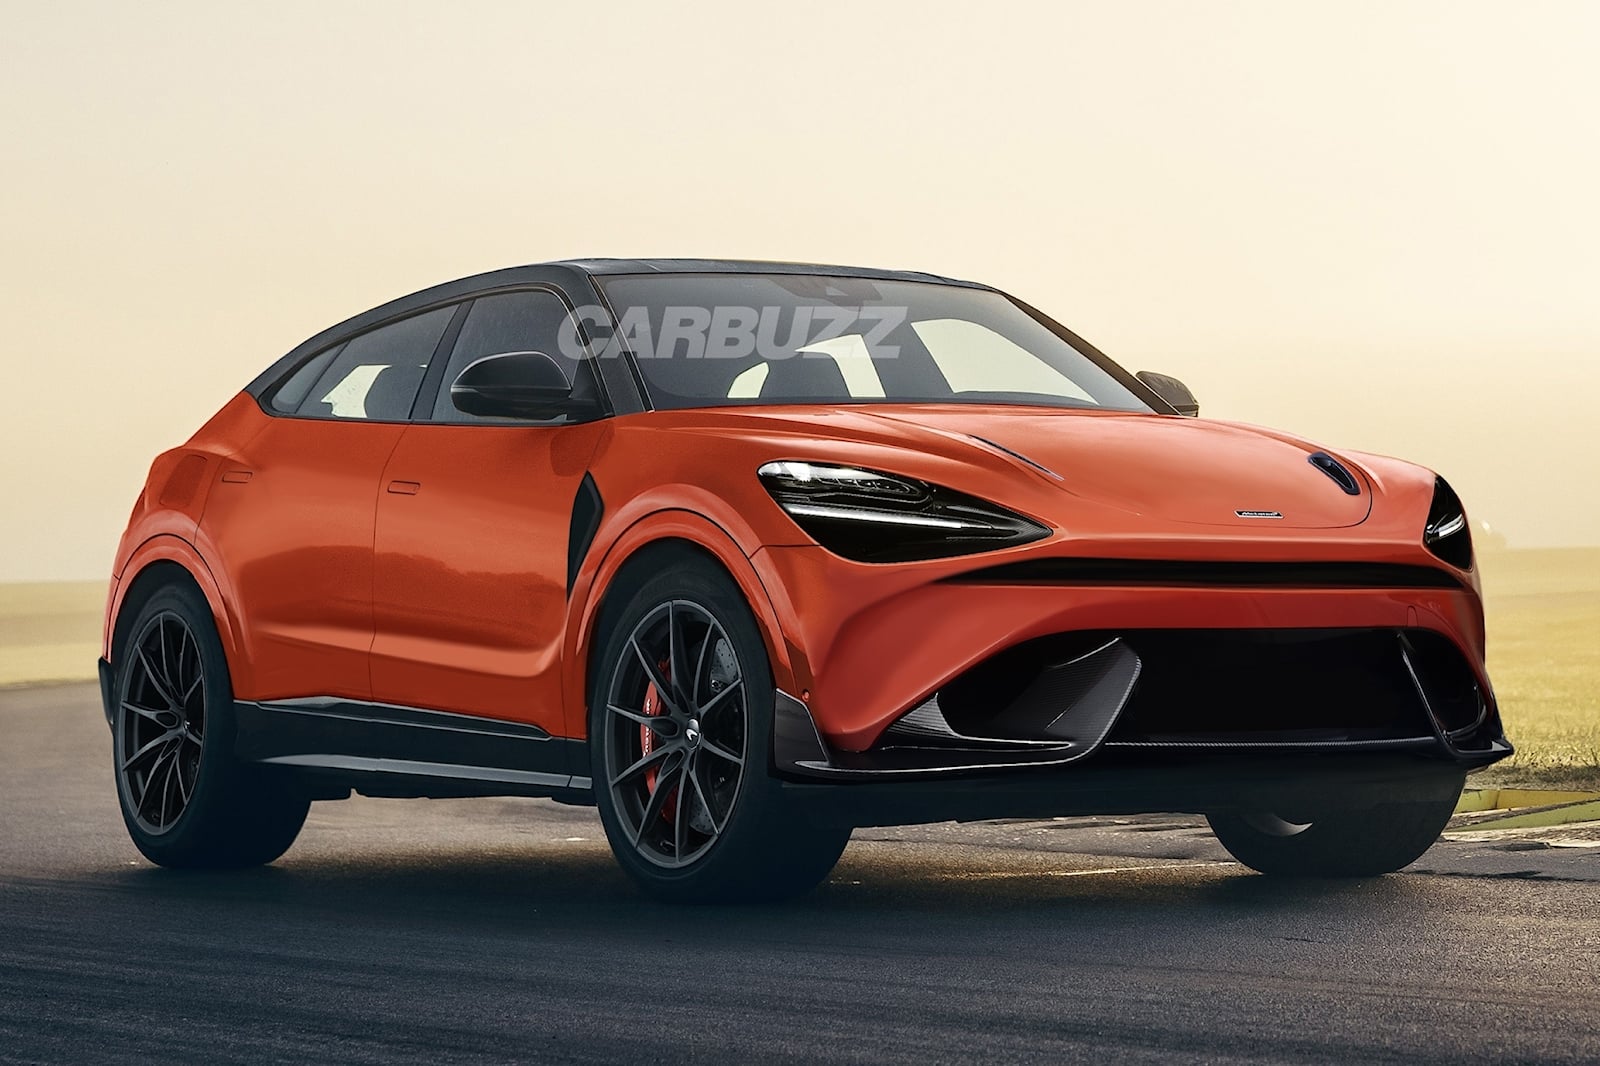 Electric McLaren SUV Rumored To Arrive In 2026 With Carbon Fiber Tub